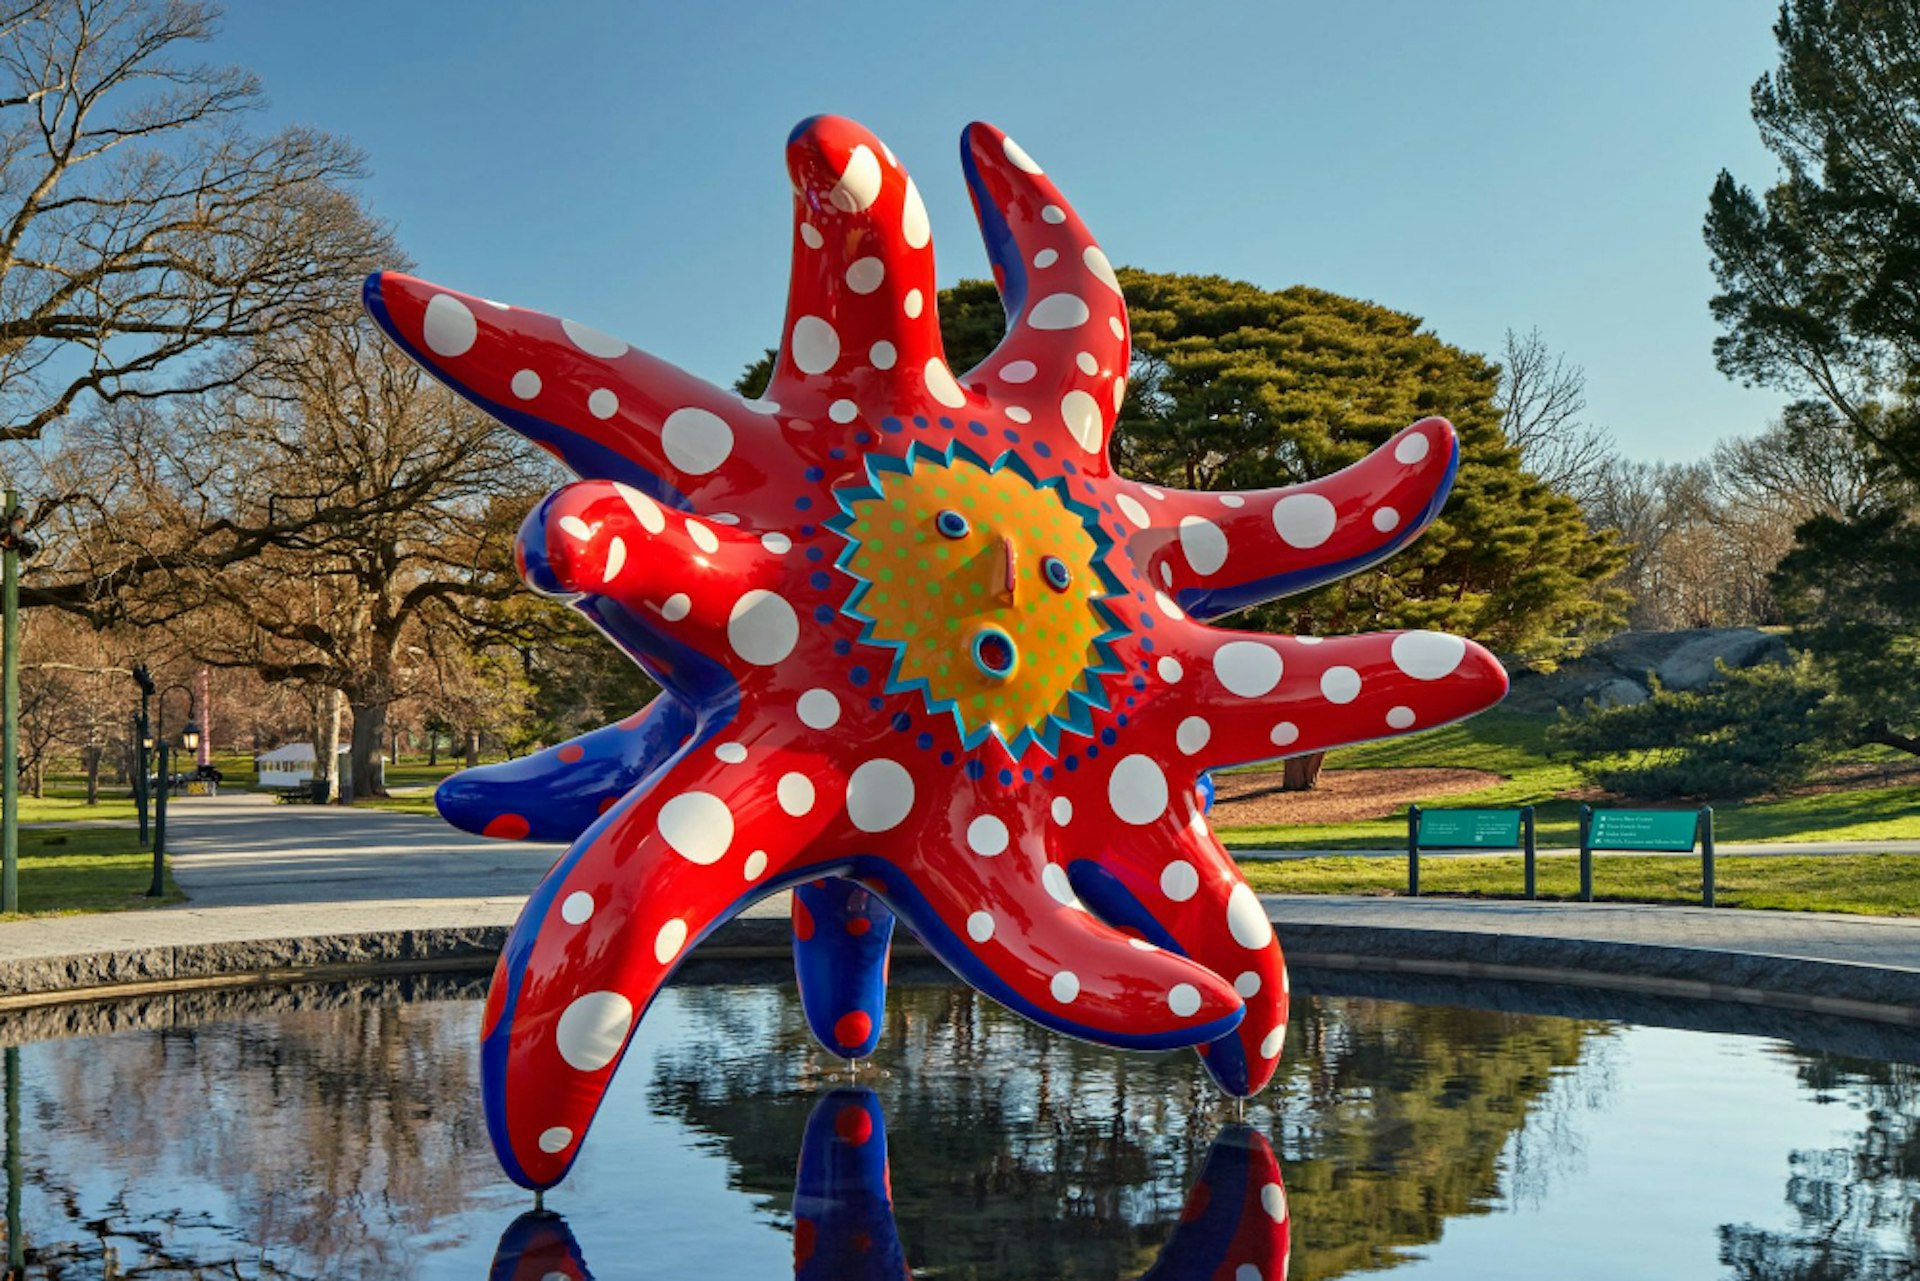 29 places to see Yayoi Kusama's art in 2022 - Lonely Planet